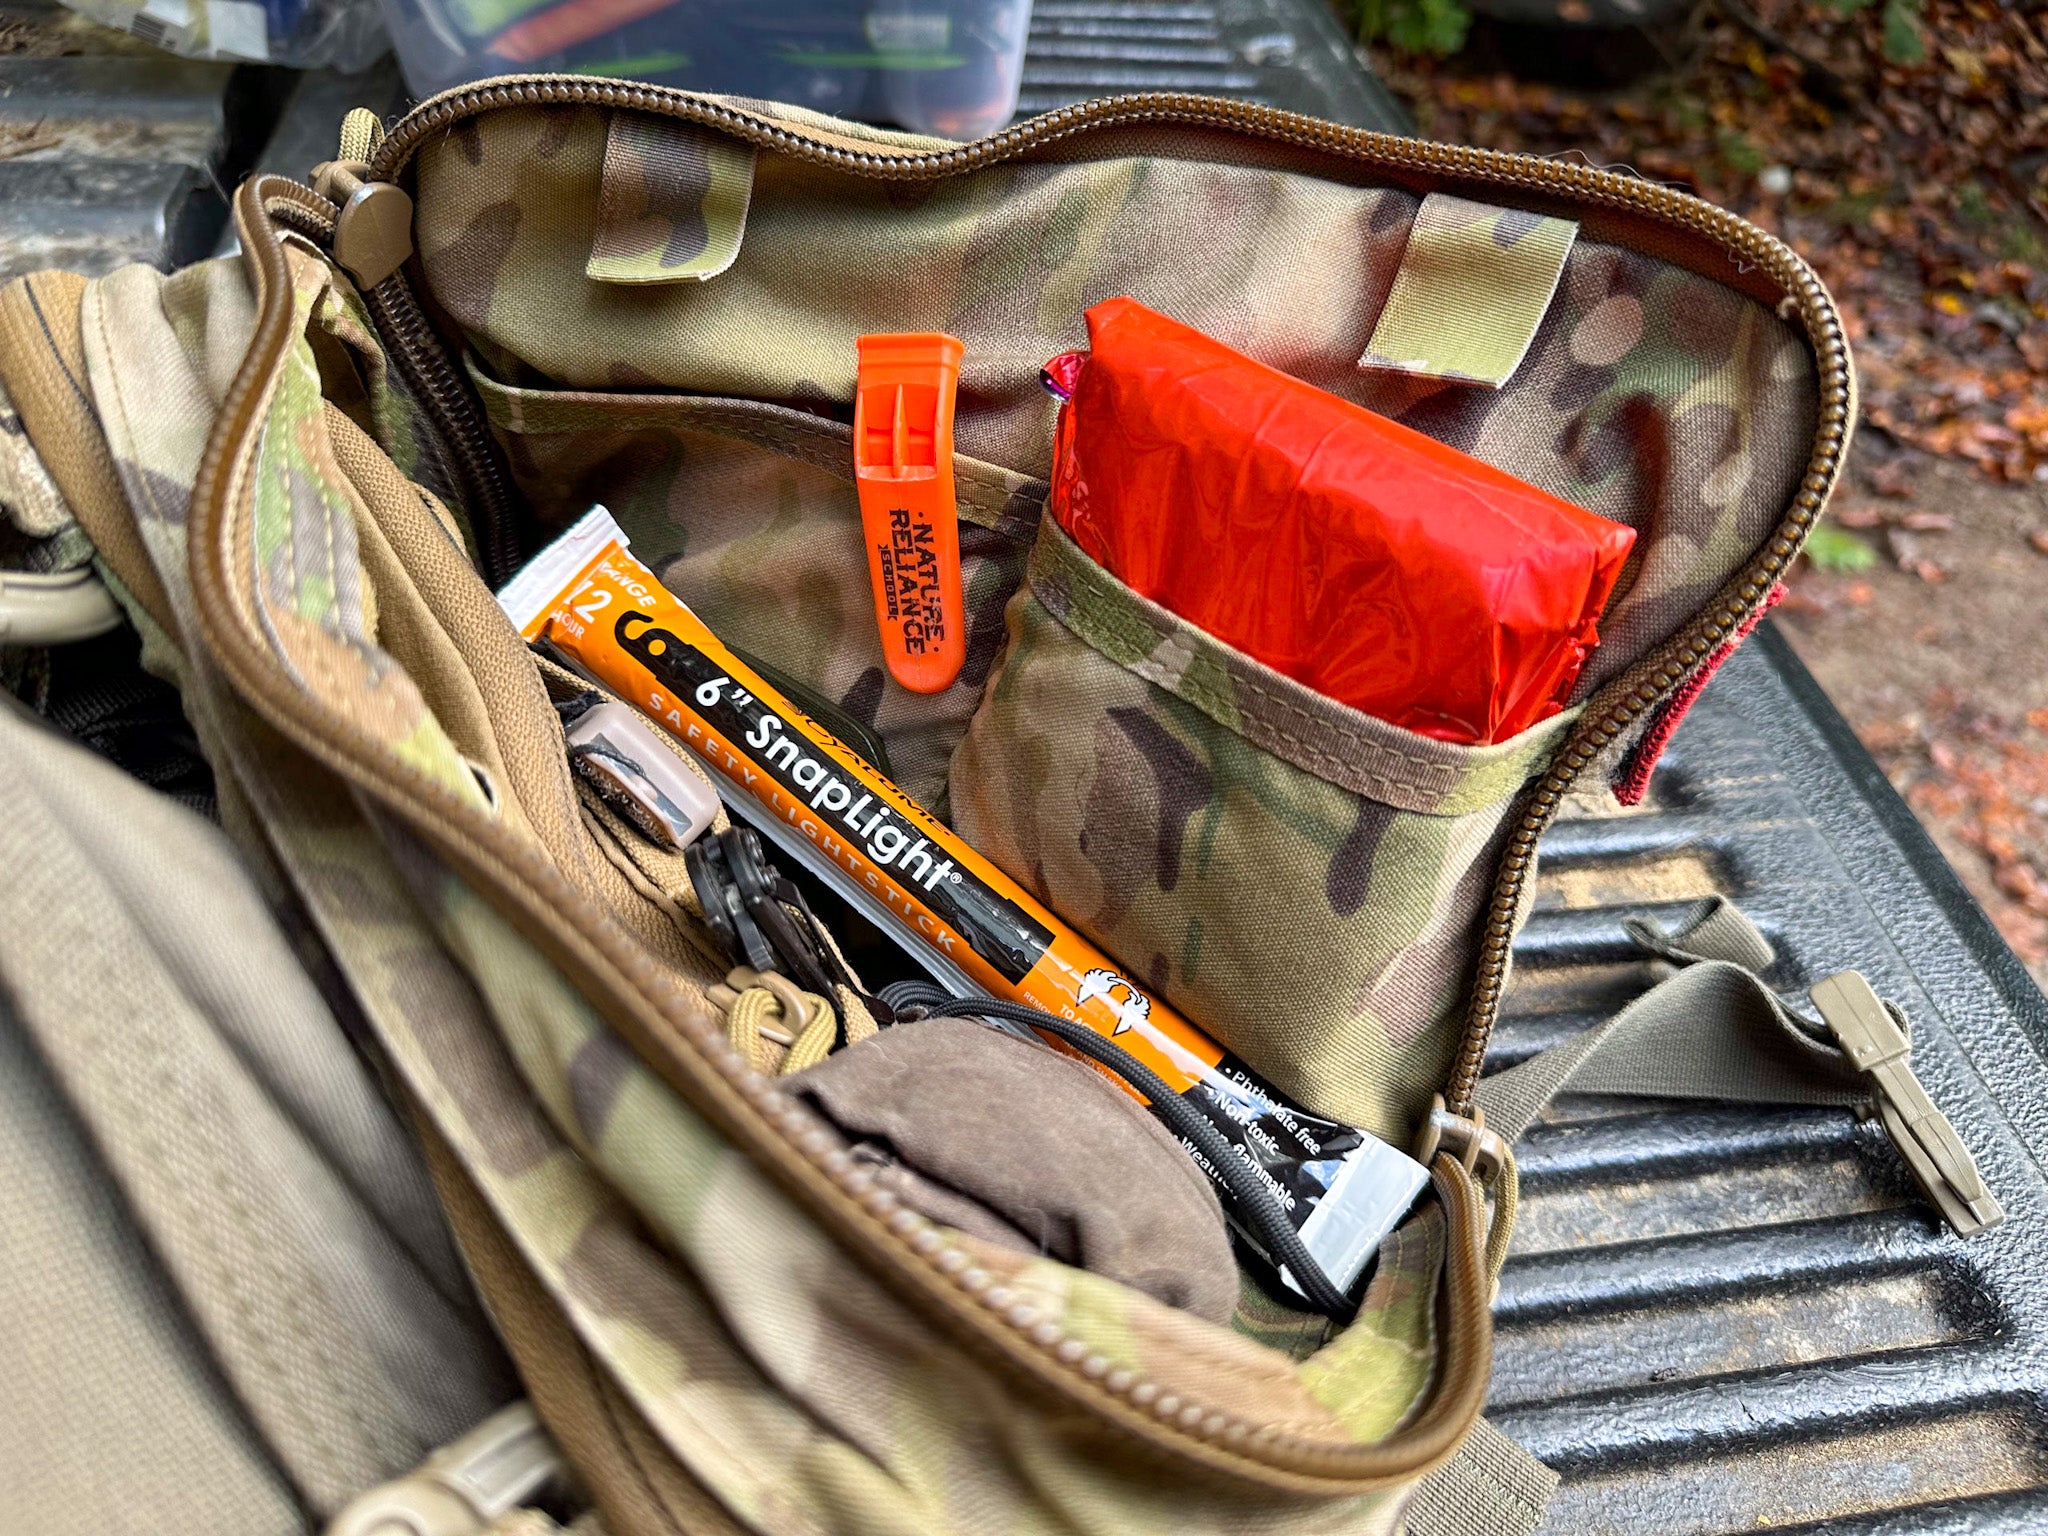 A survival pack with various items that can be used as ways to signal for help in the wilderness.